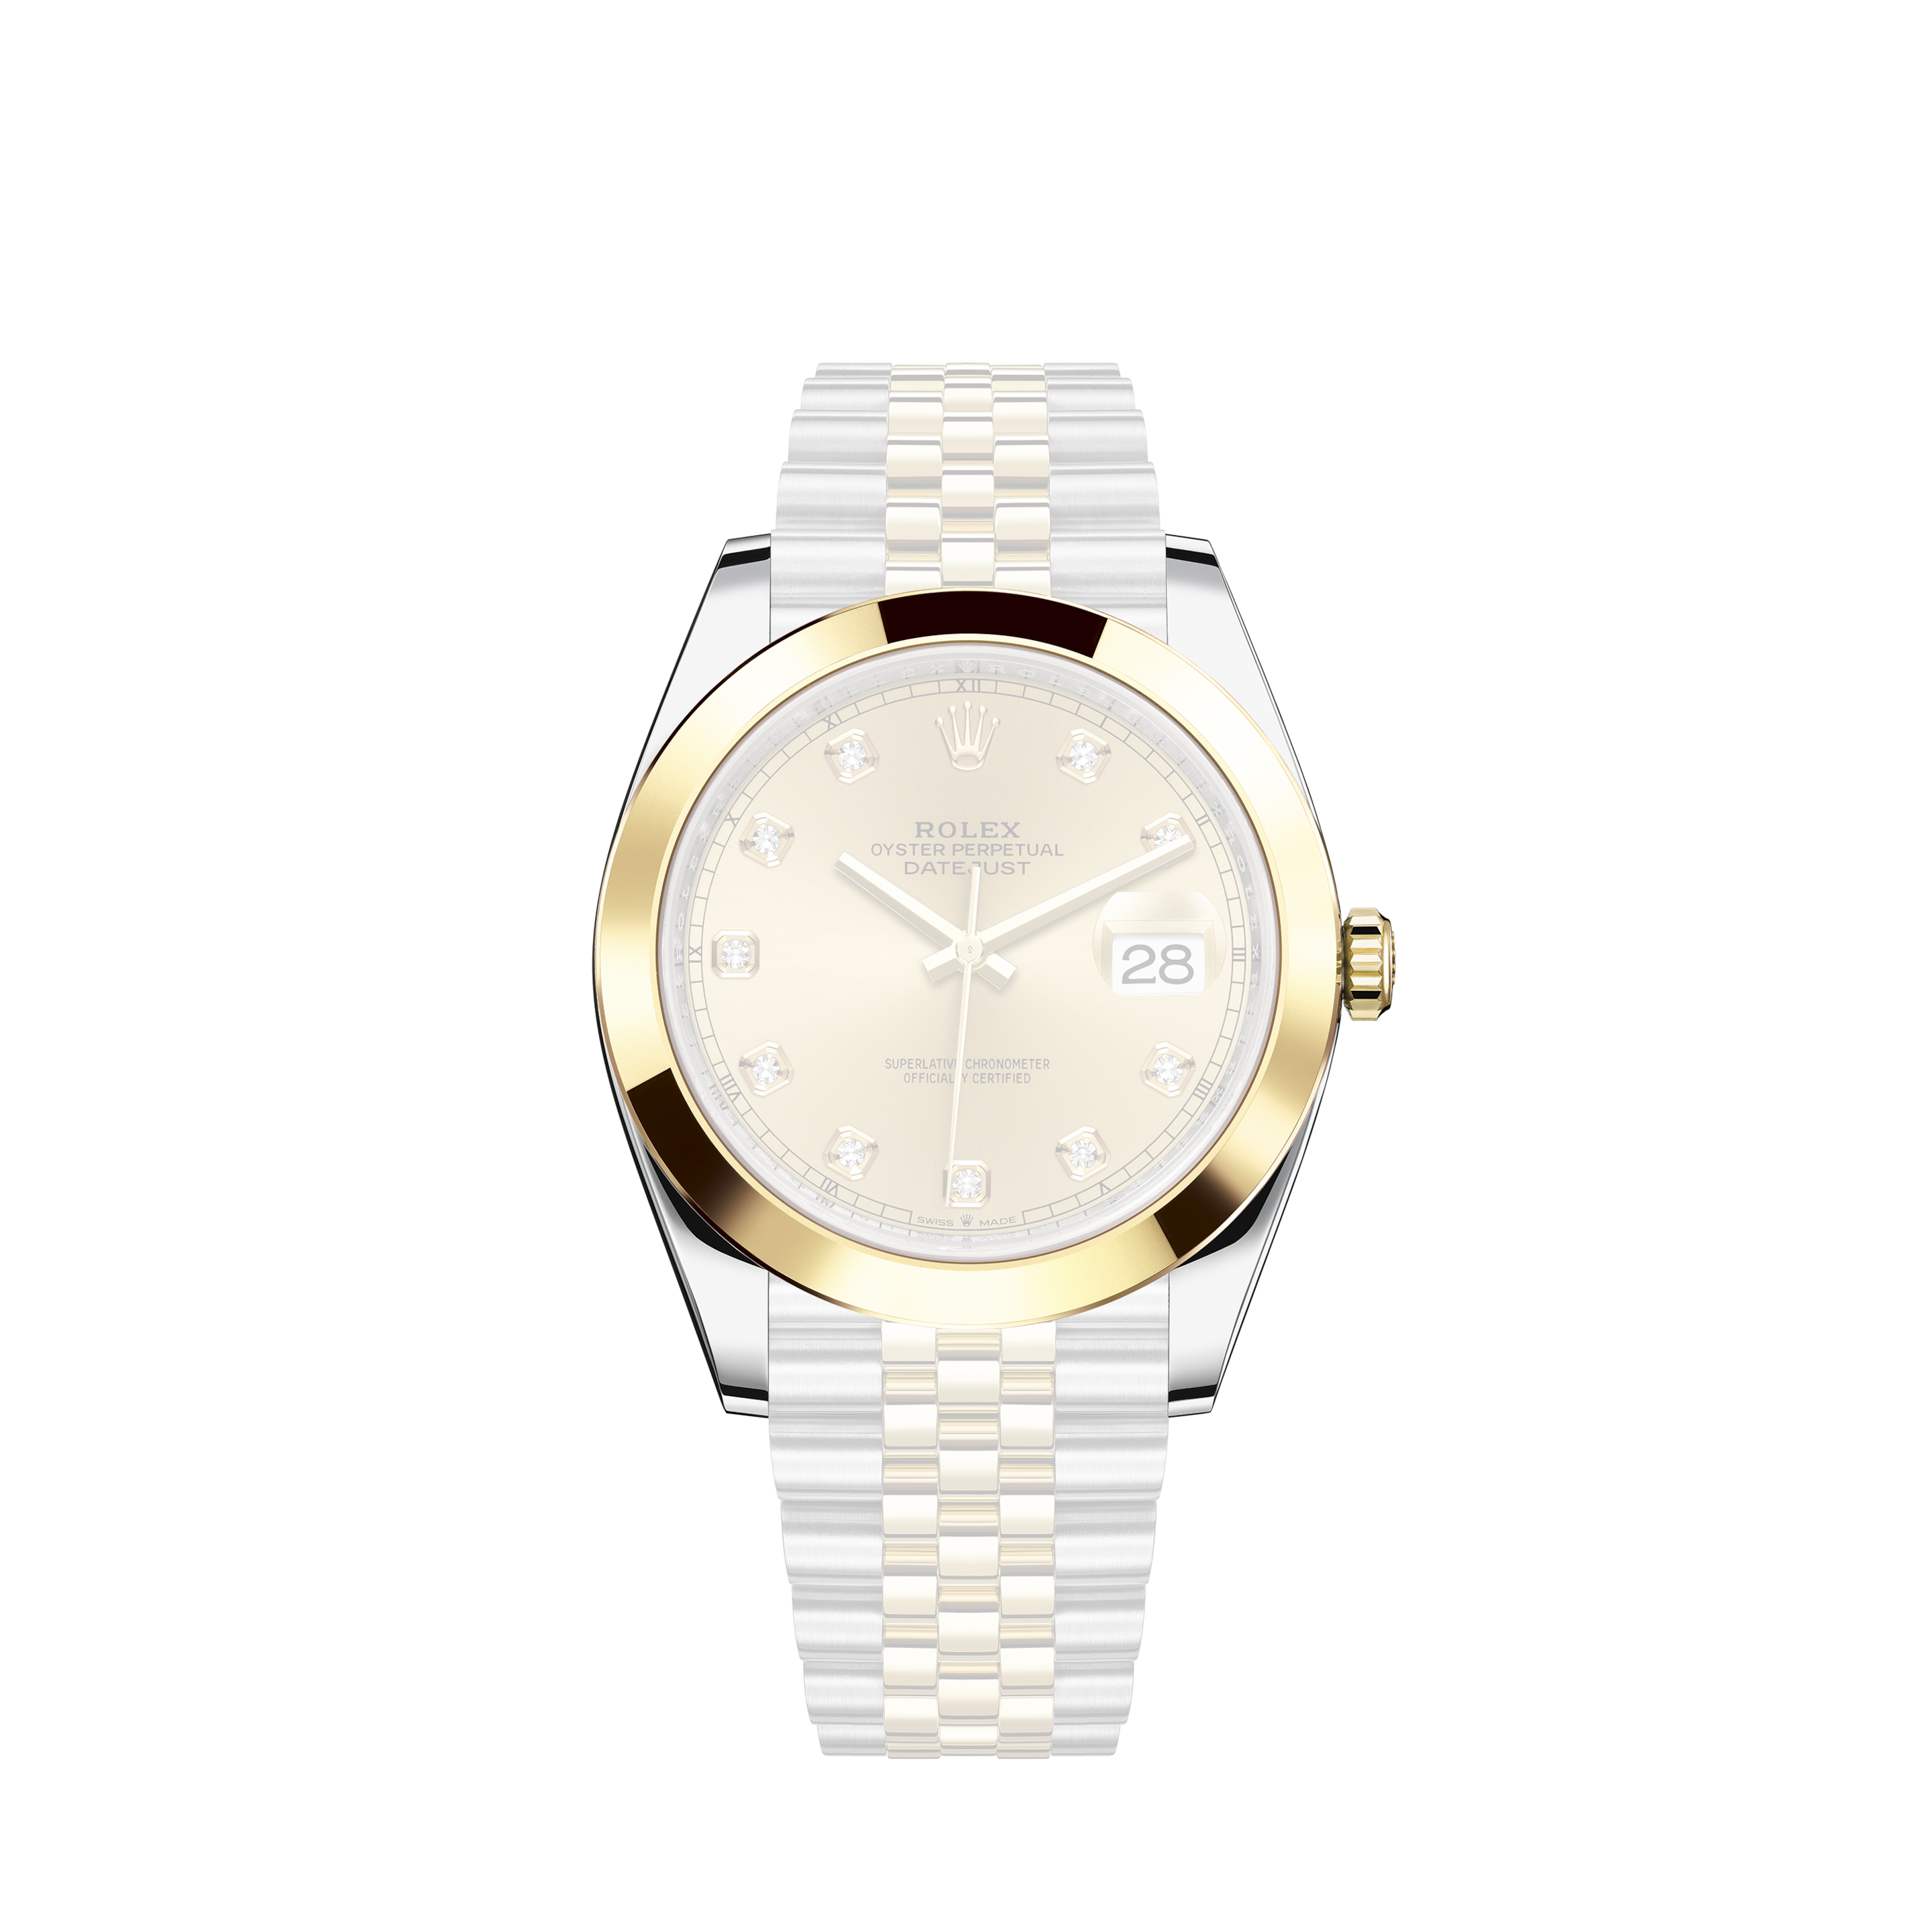 Rolex Datejust 41mm Steel and Yellow Gold 126303 Champagne Index Jubilee